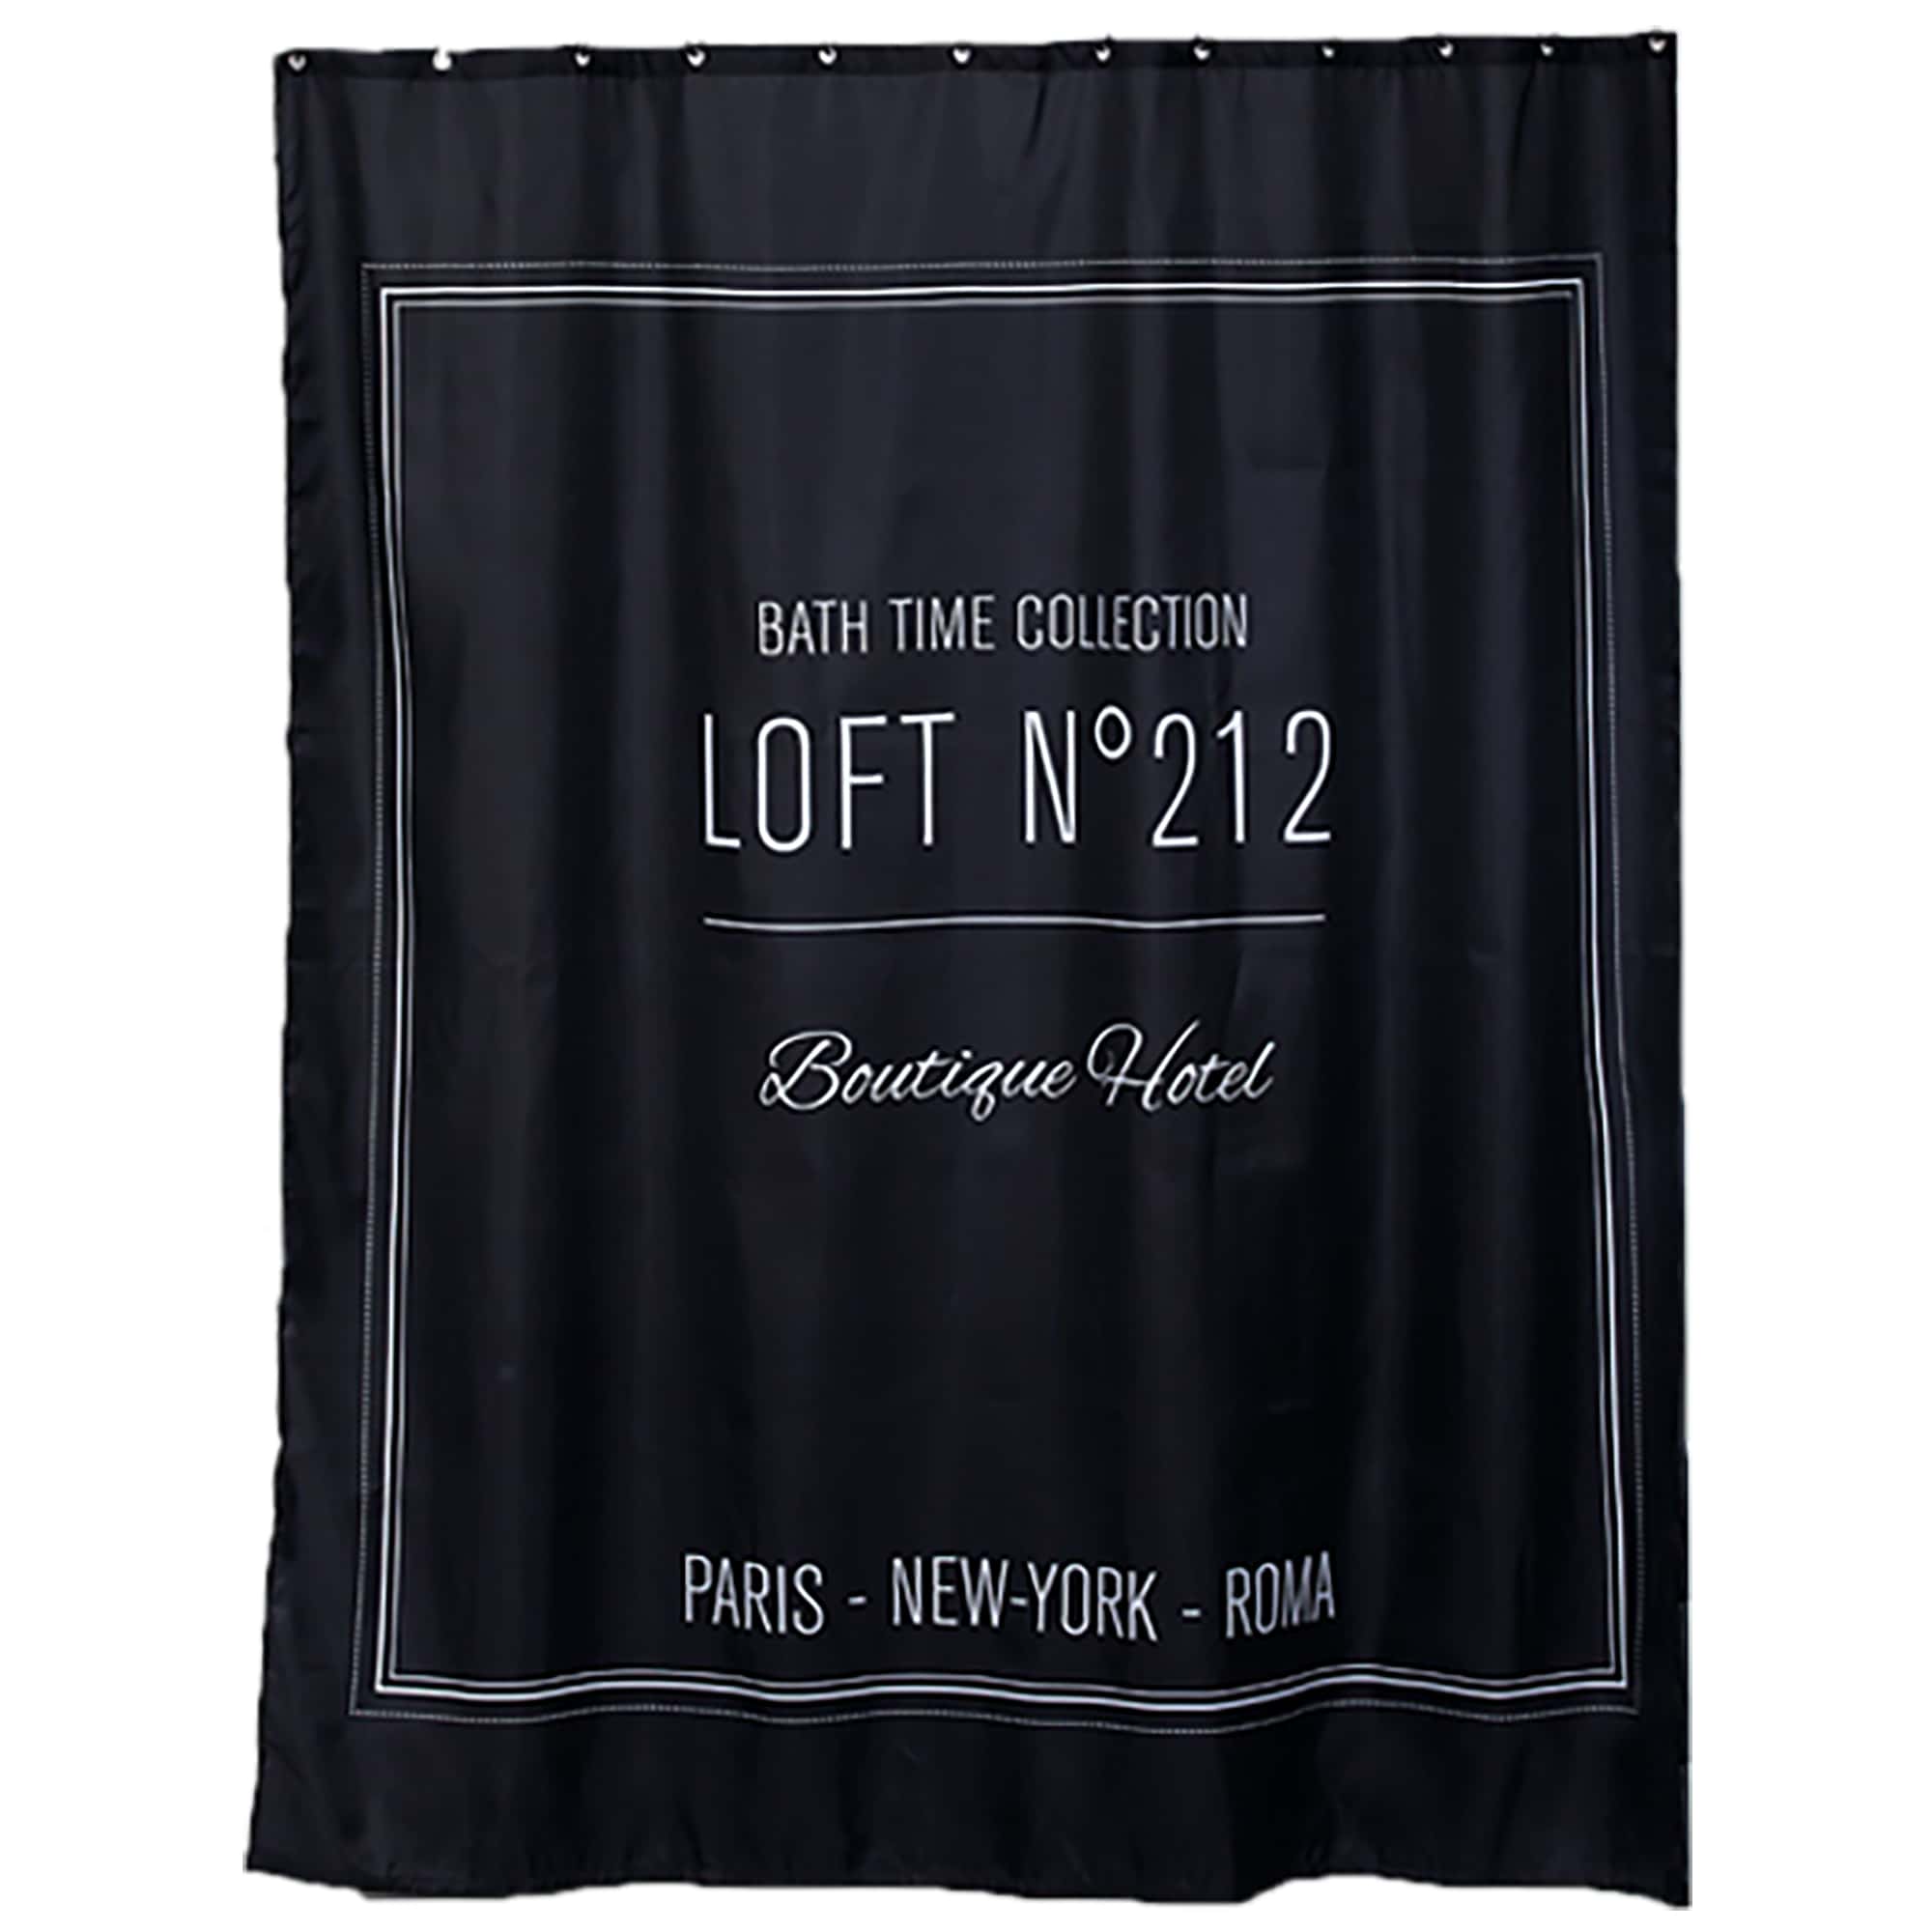 extra-long black shower curtain with white writing